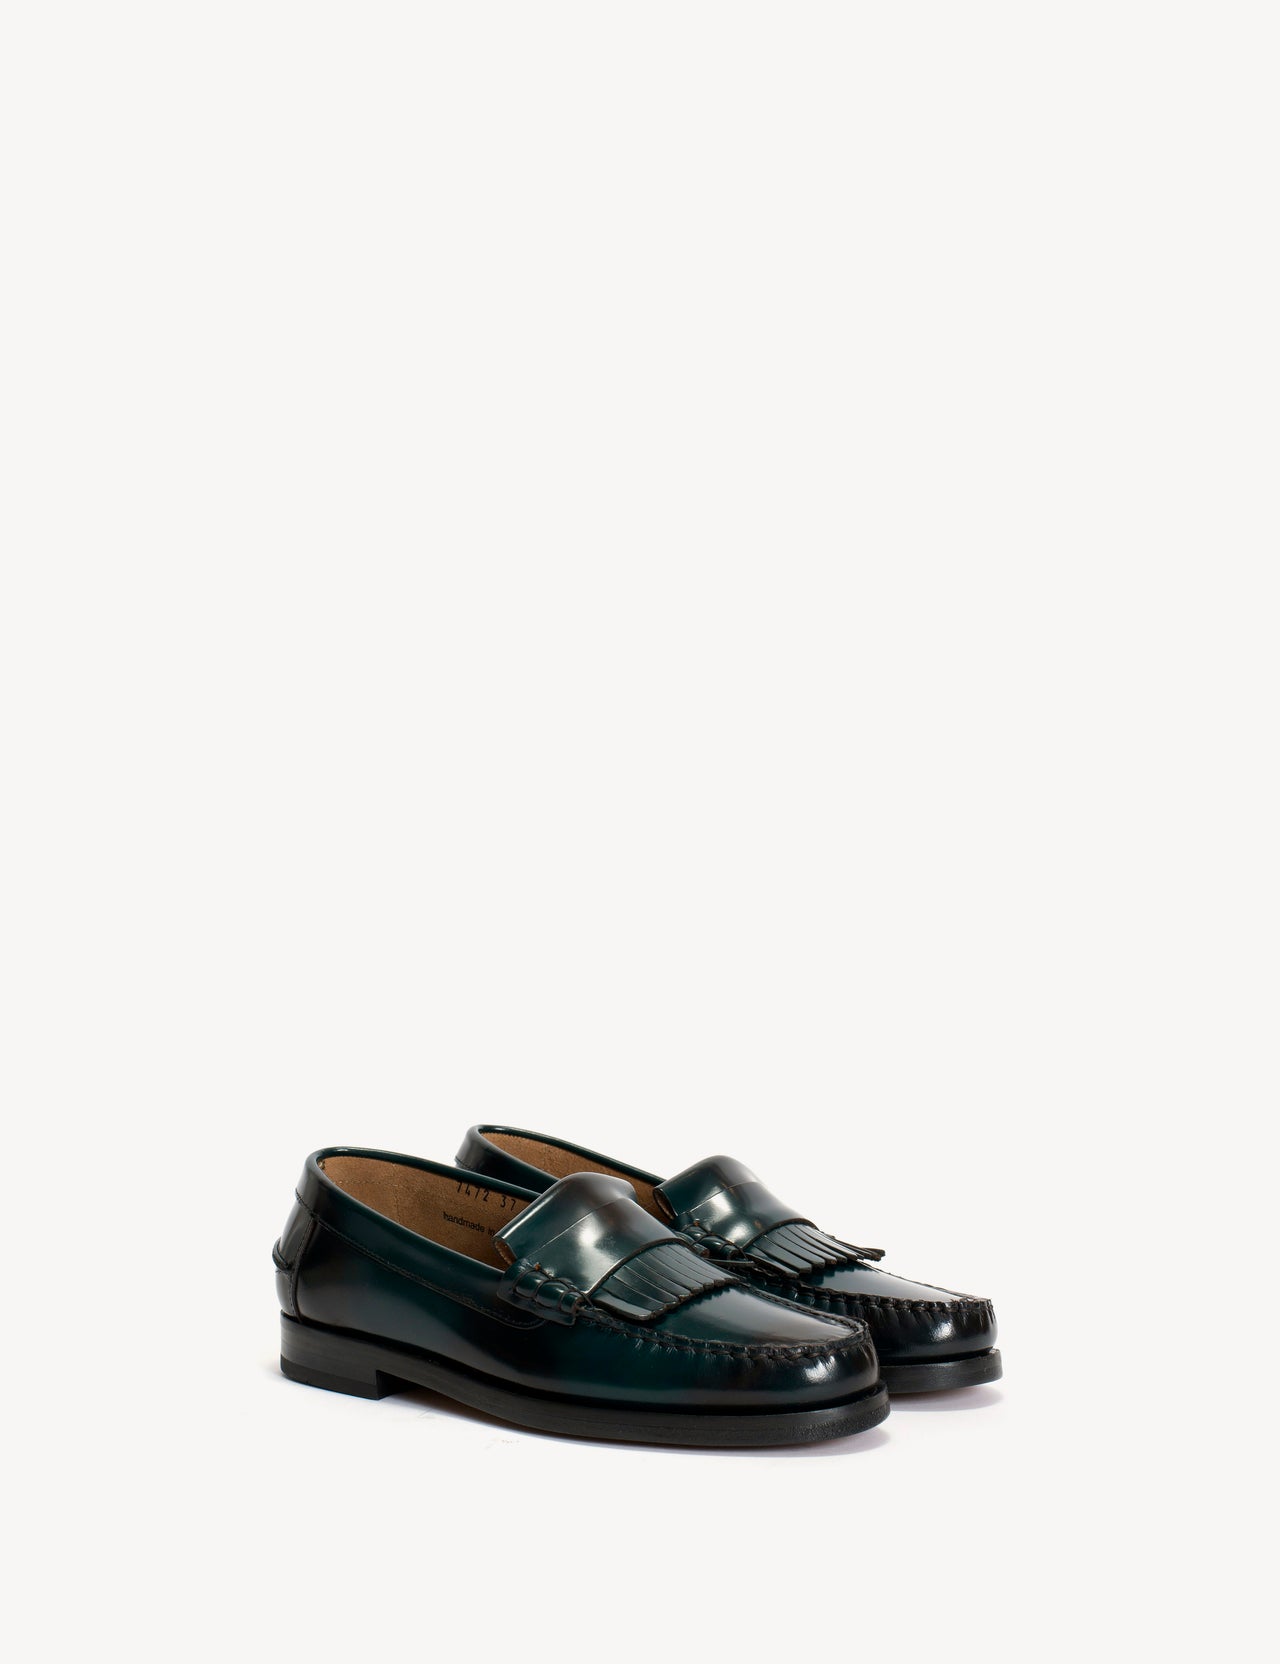 Moccasin Loafer With Fringes In Green Polido Leather